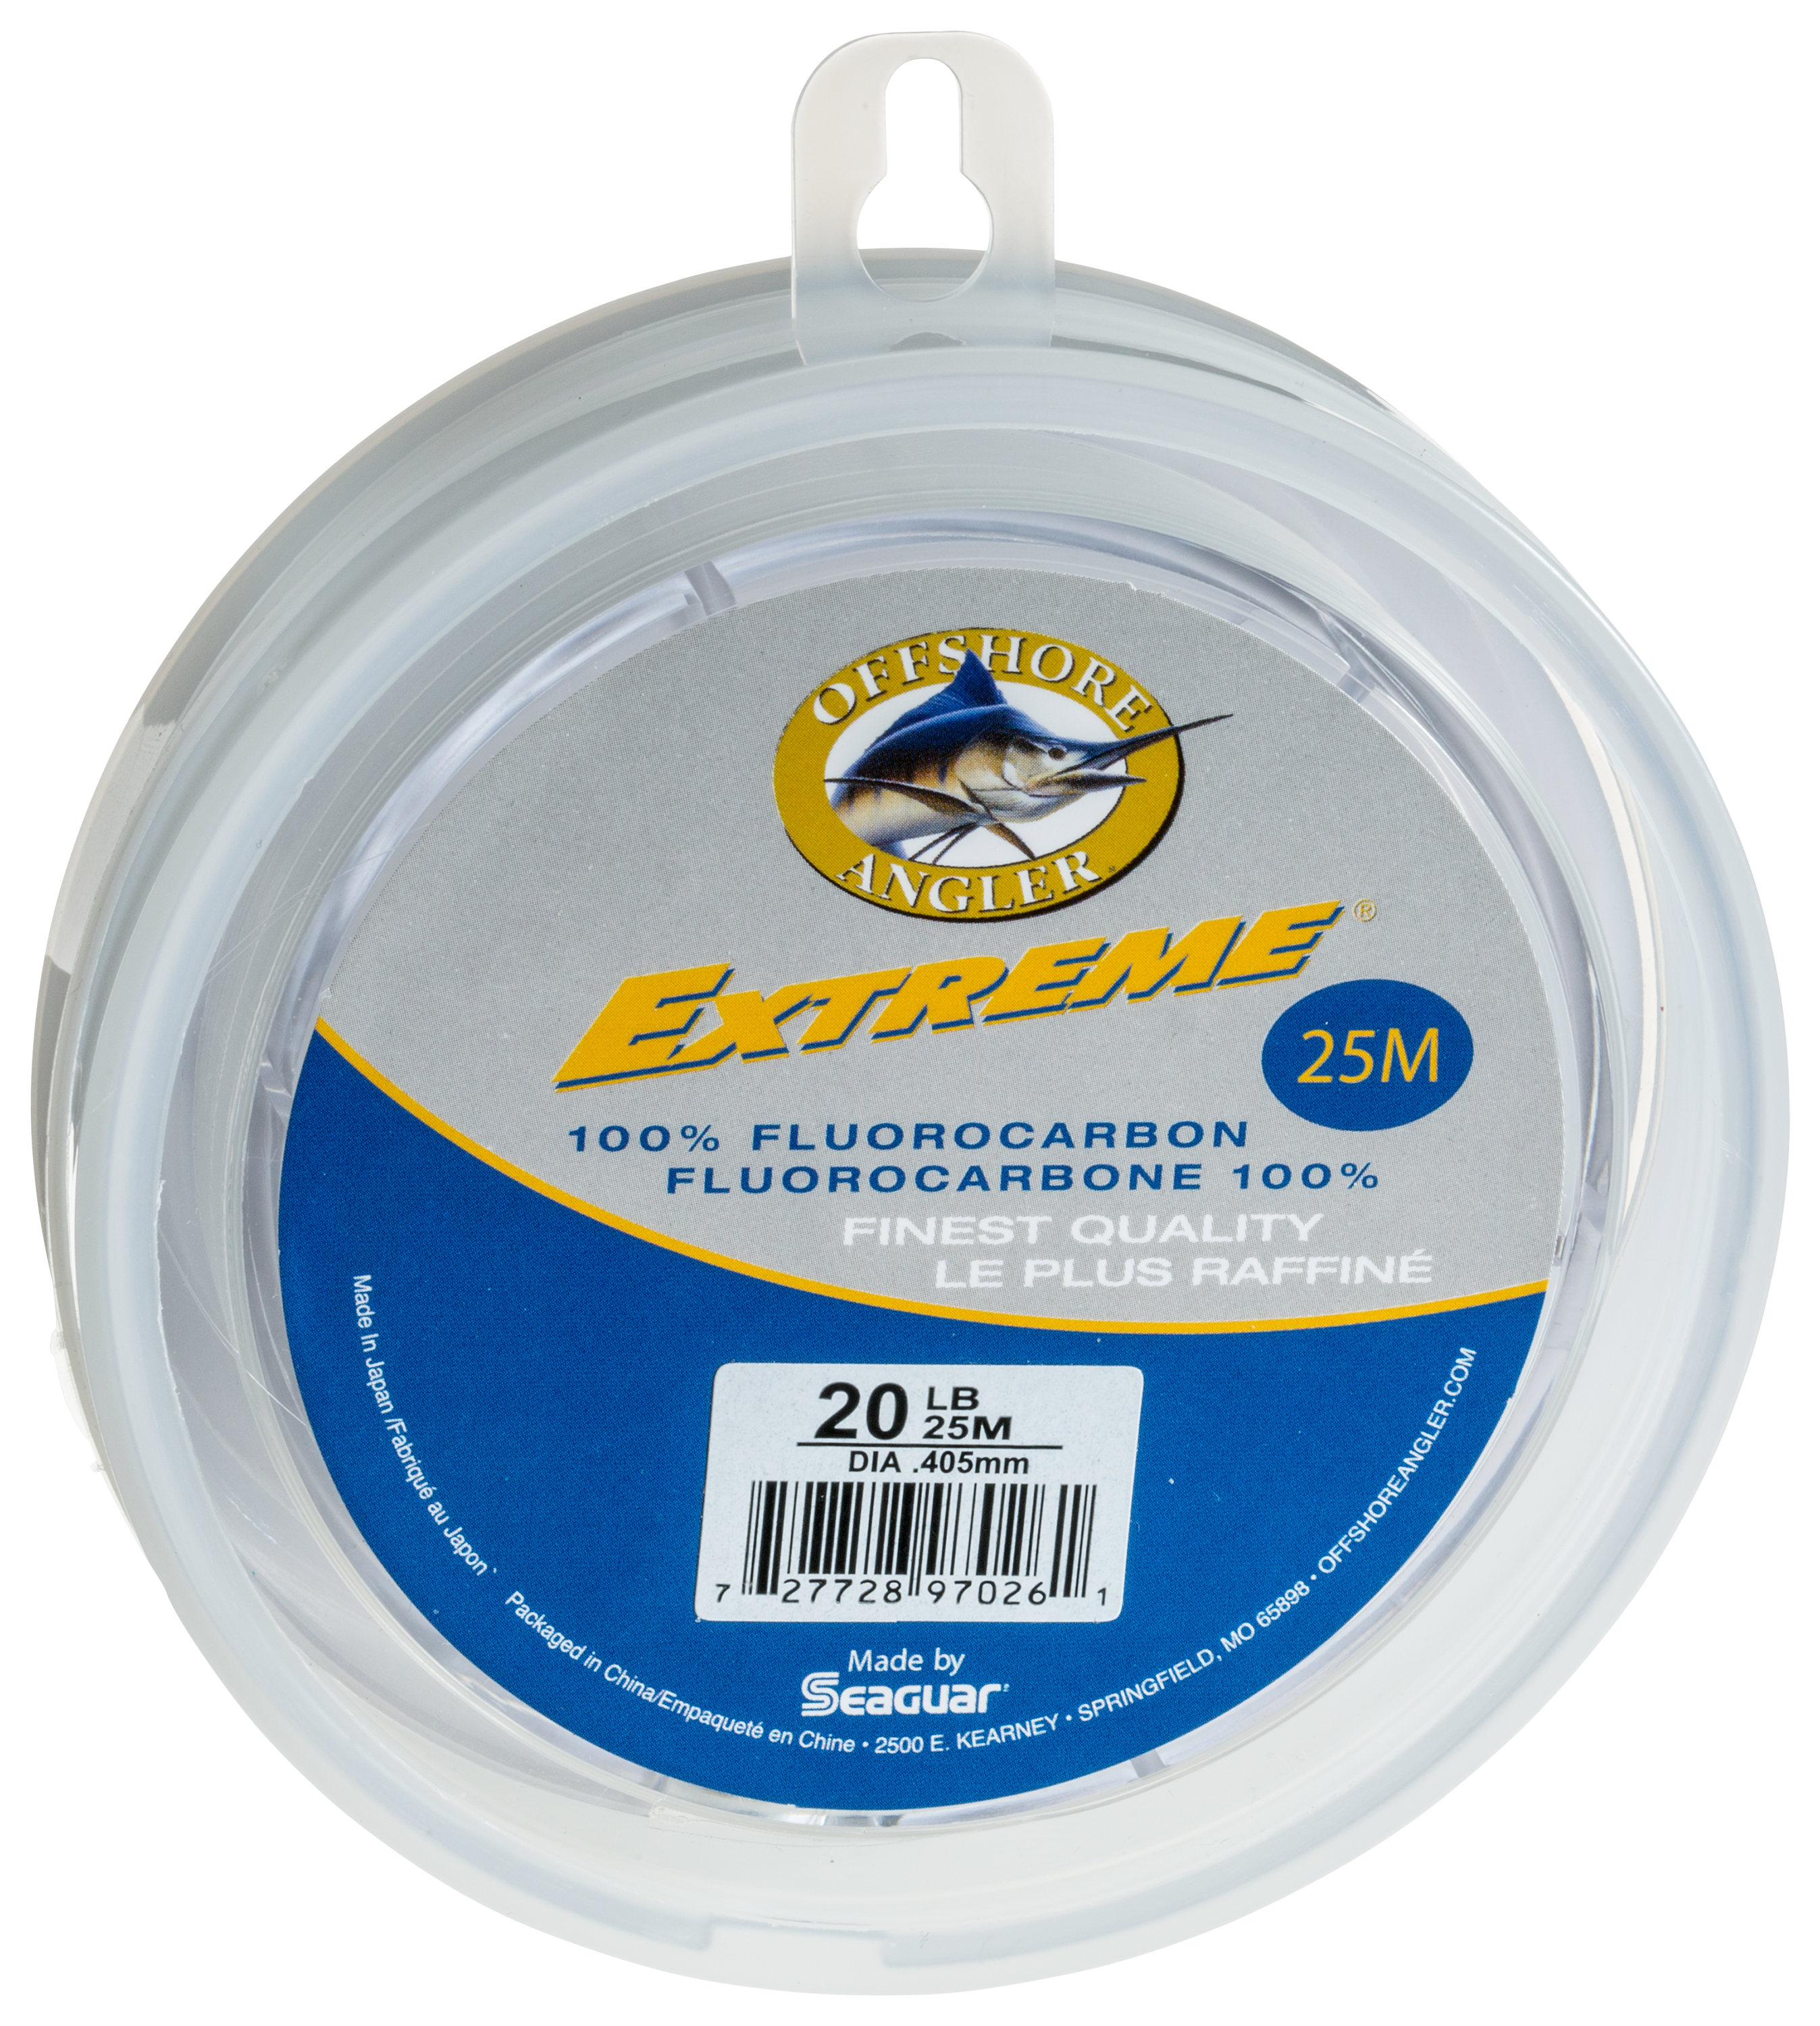 Offshore Angler Extreme Fluorocarbon Saltwater Leader 100 Meters - Clear - 50 lb.